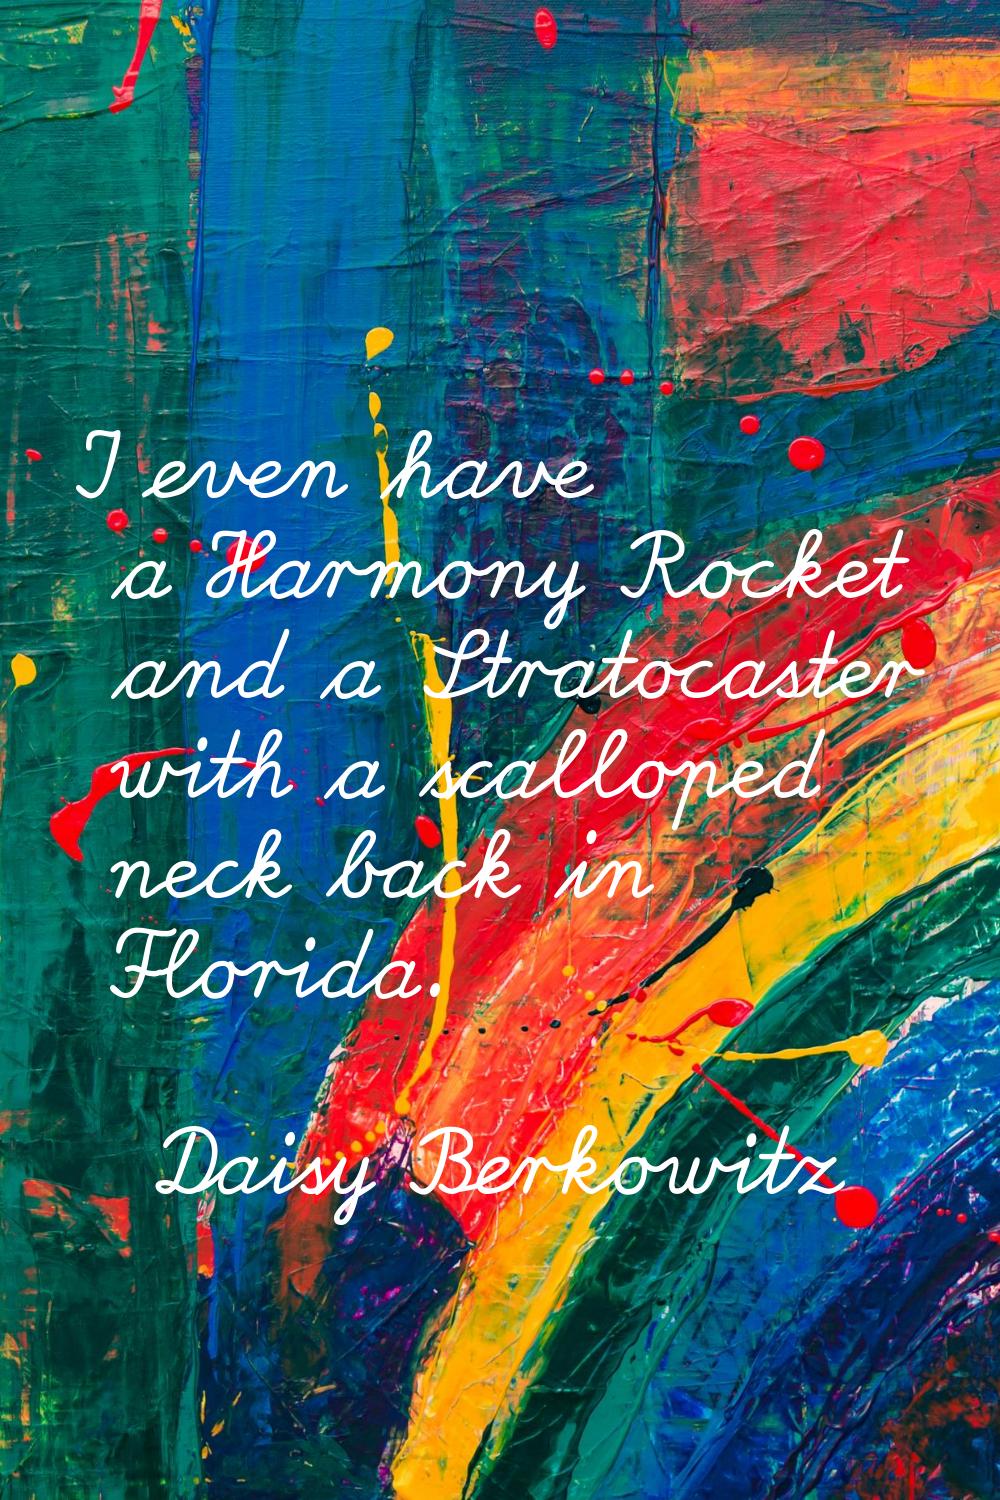 I even have a Harmony Rocket and a Stratocaster with a scalloped neck back in Florida.